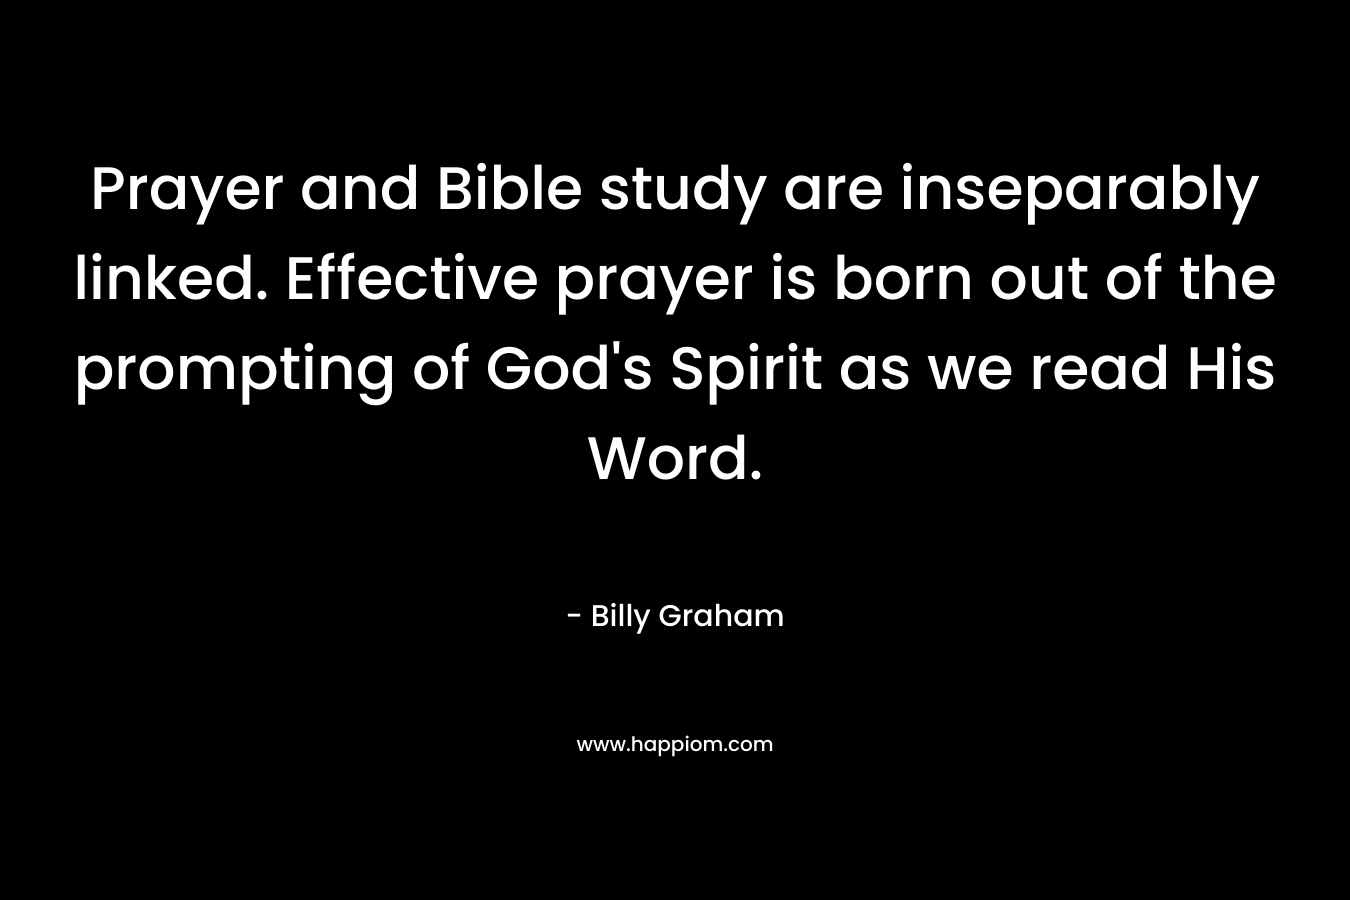 Prayer and Bible study are inseparably linked. Effective prayer is born out of the prompting of God’s Spirit as we read His Word. – Billy Graham